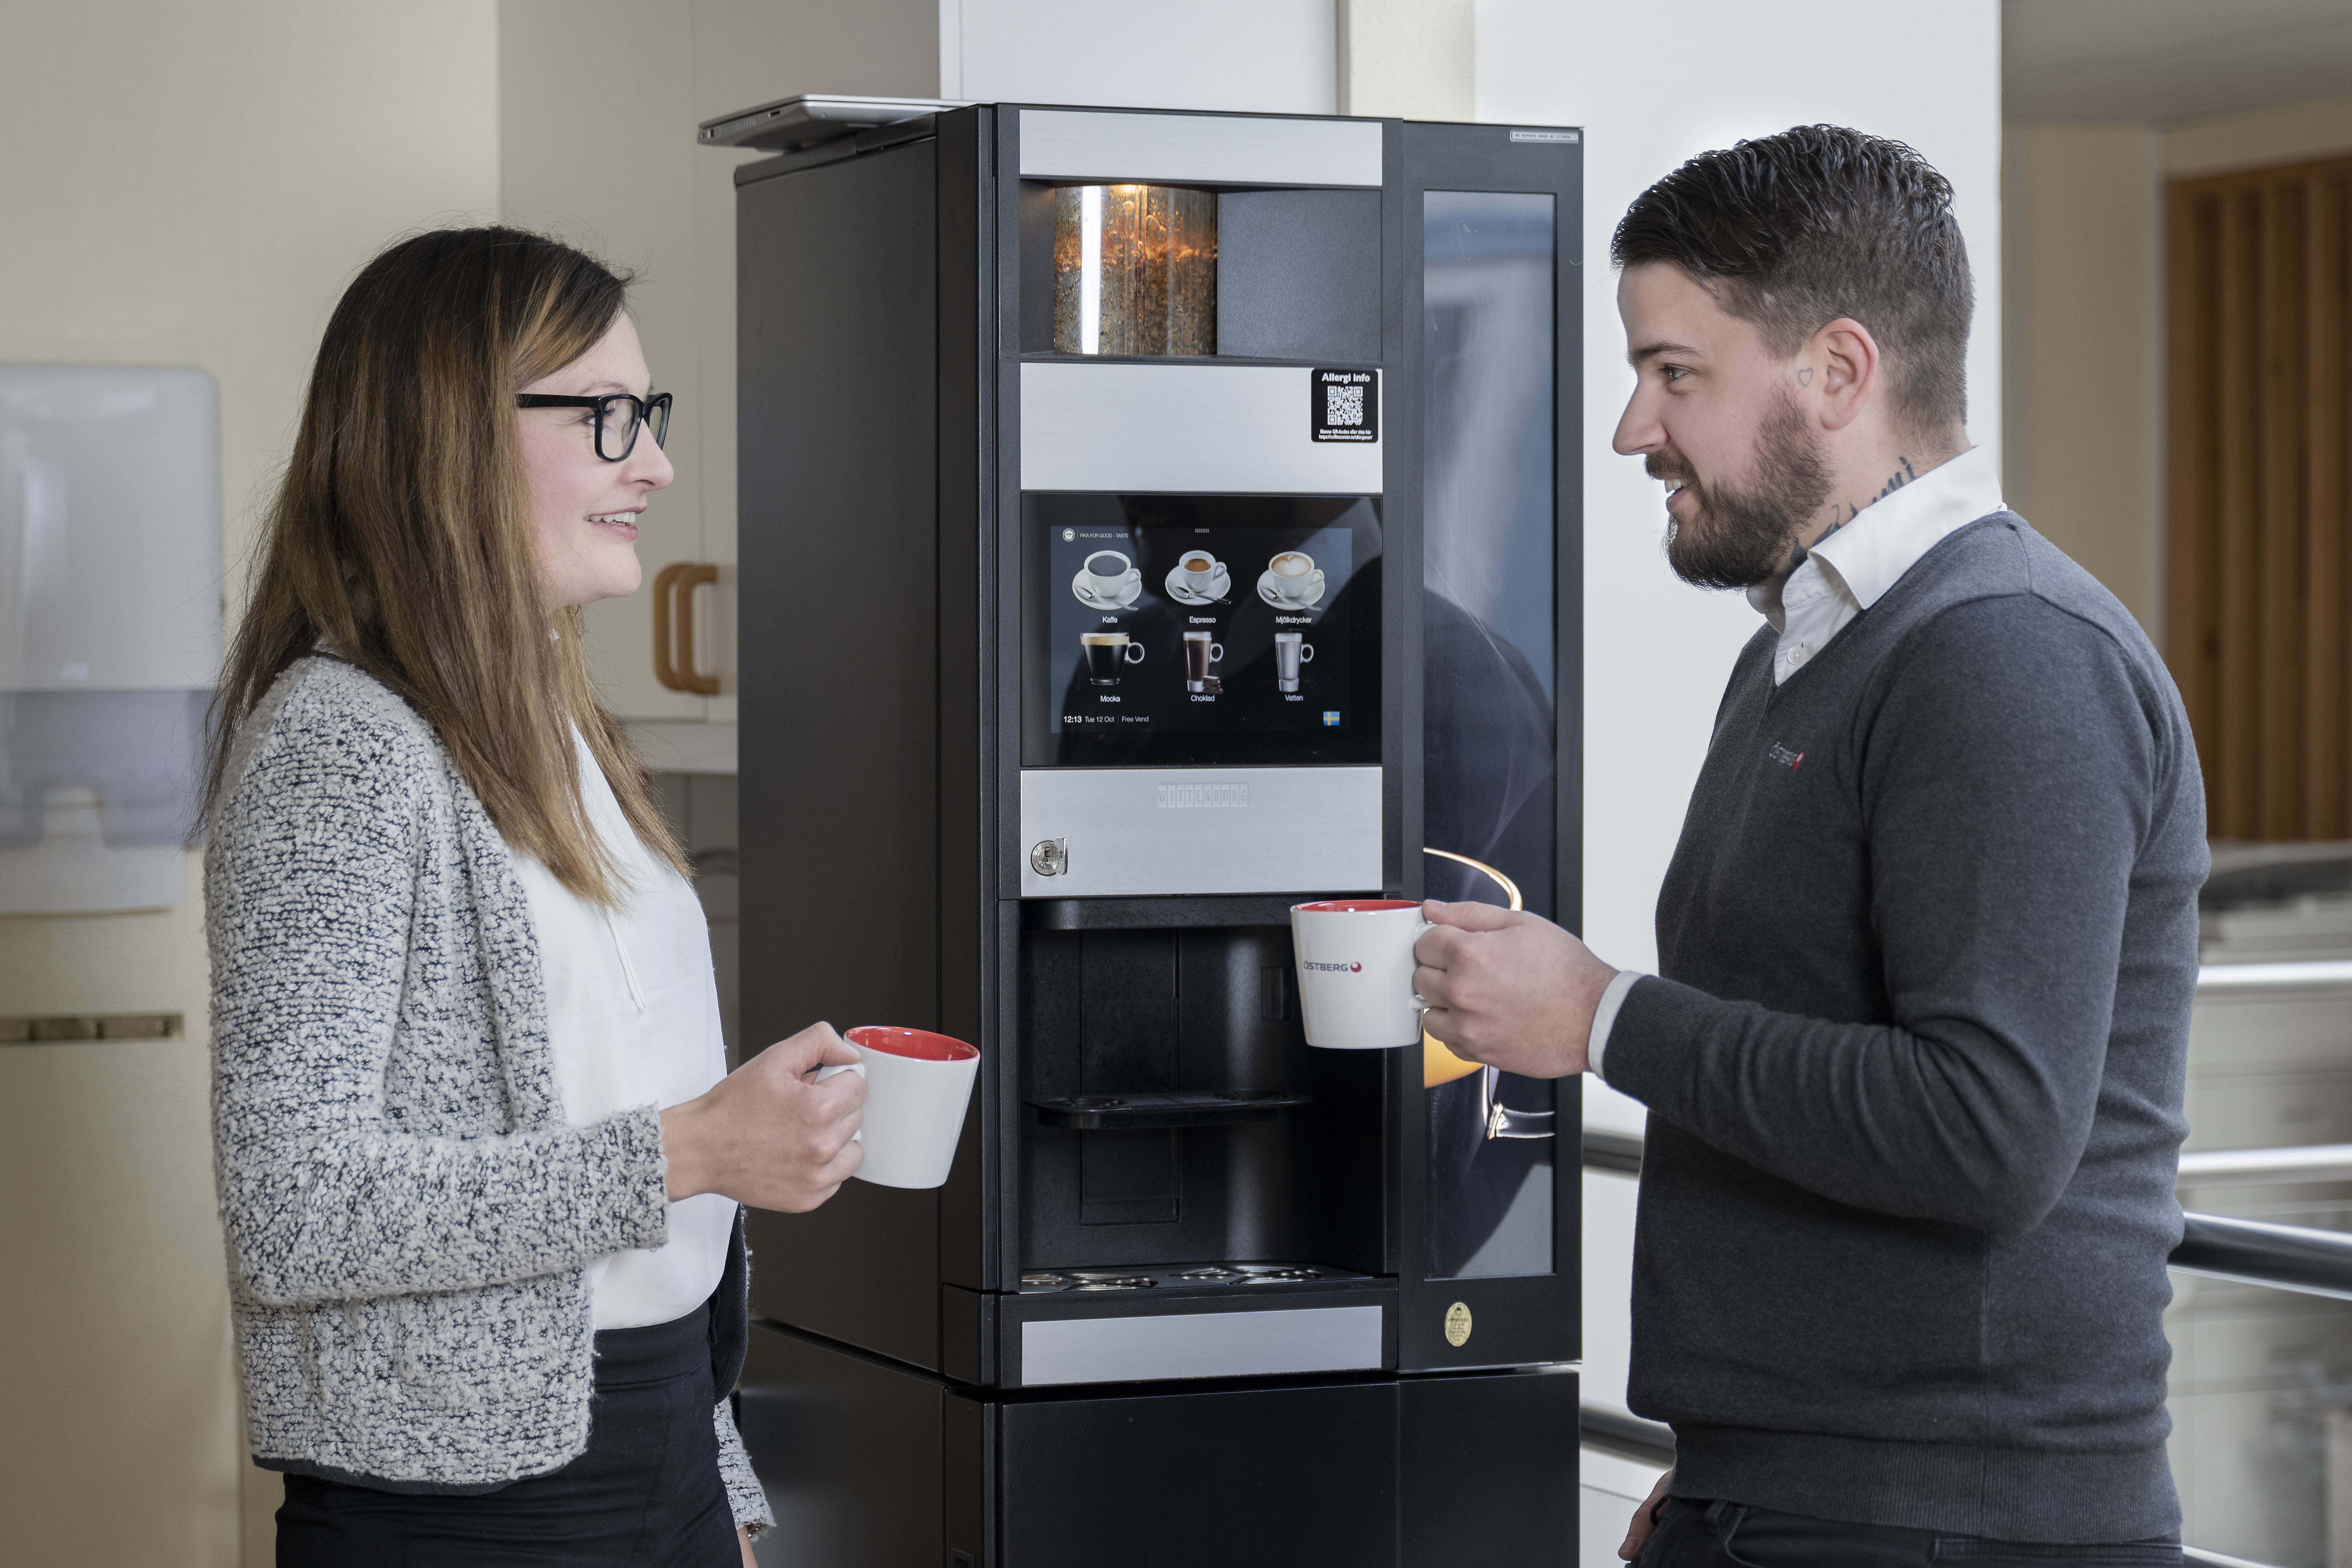 Colleagues at the coffee machine